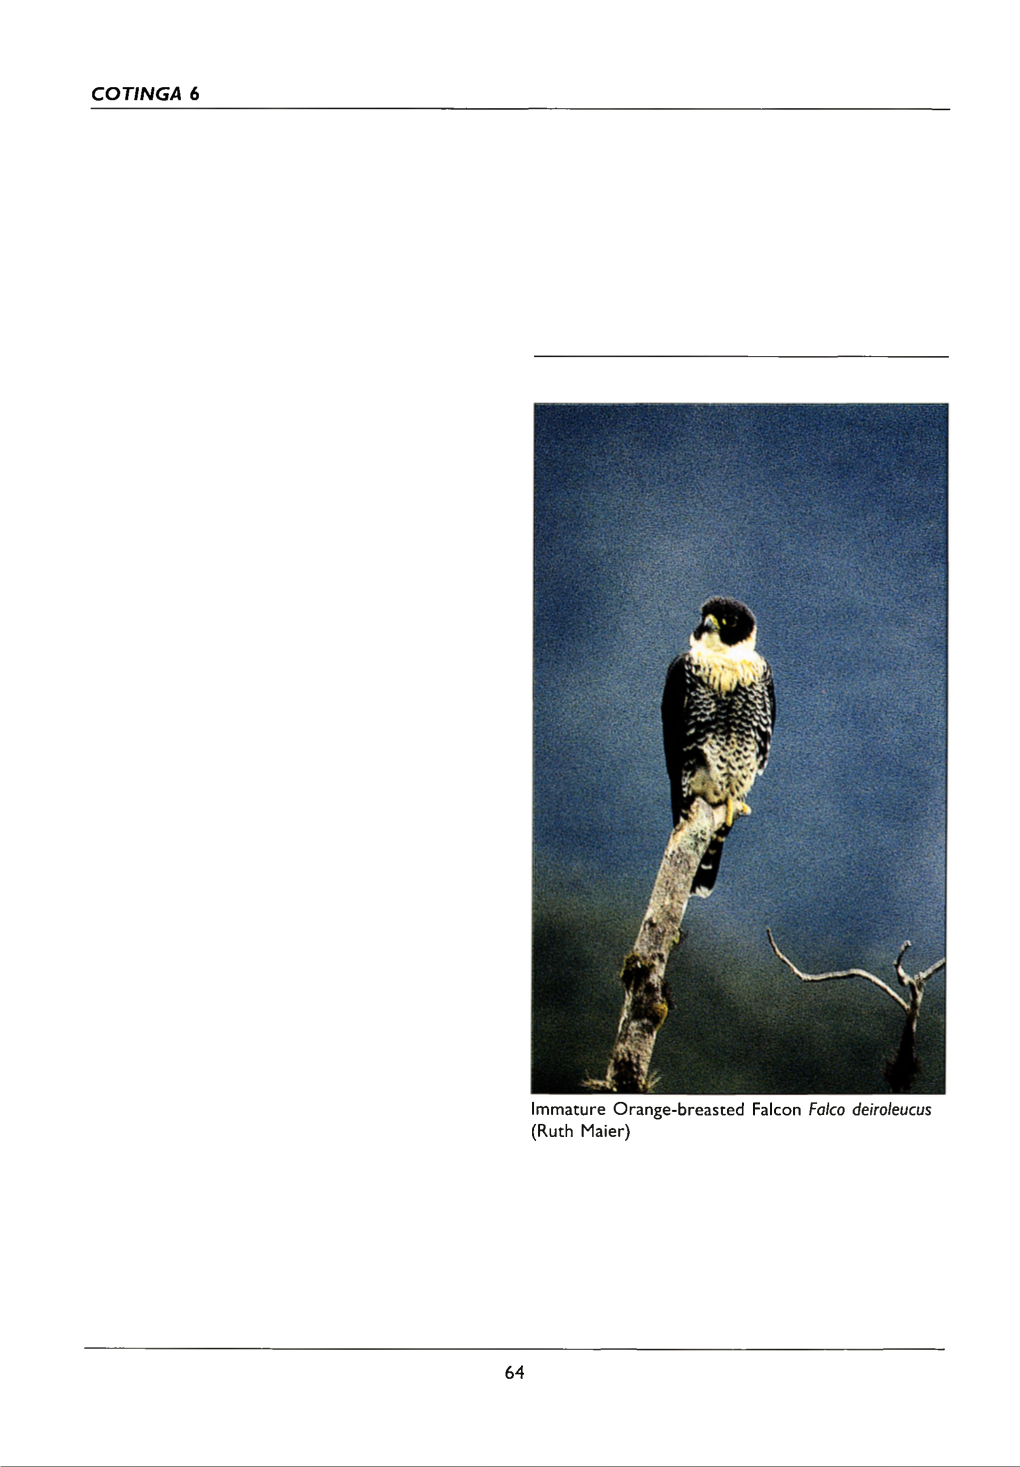 First Records of the Orange-Breasted Falcon Falco Deiroleucus in Central Amazonian Brazil, with Short Behavioural Notes